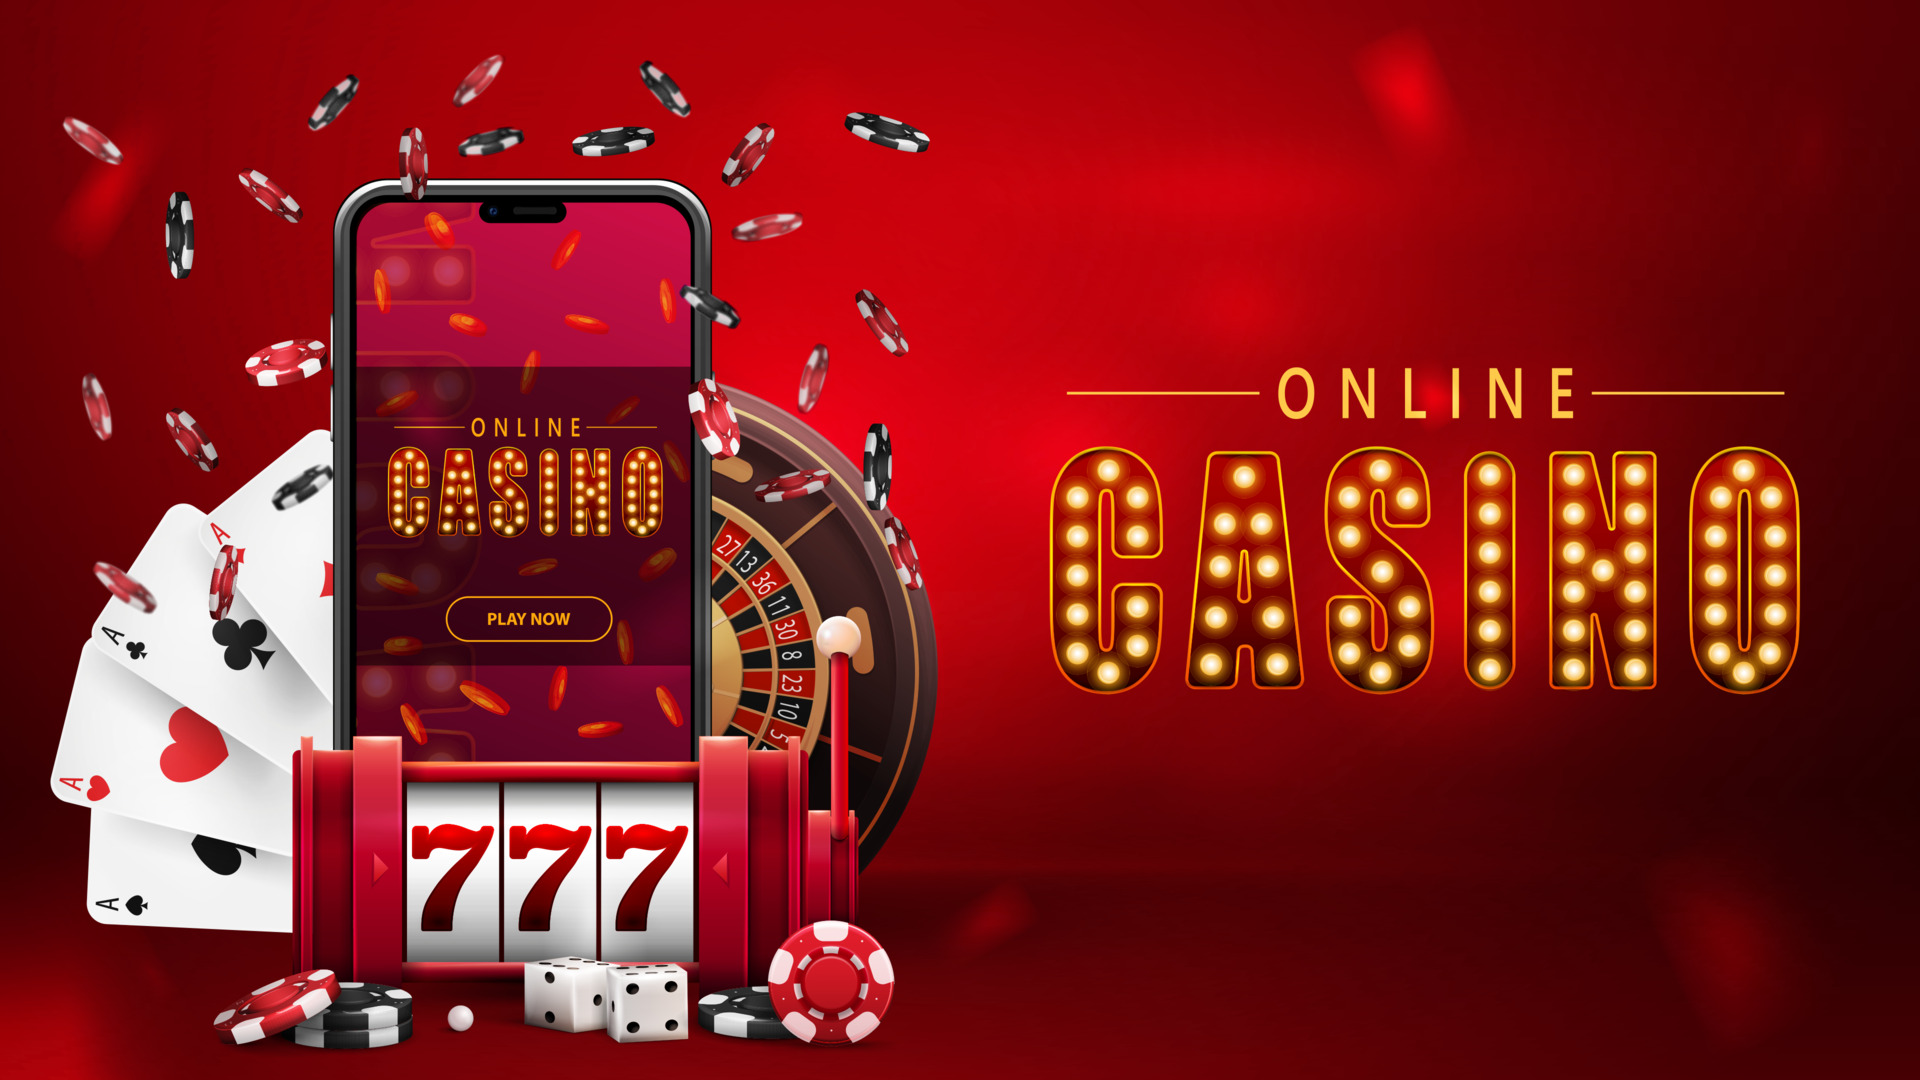 Online casino, red banner with smartphone, red slot Casino Roulette, poker chips and playing cards. 3810470 Art at Vecteezy